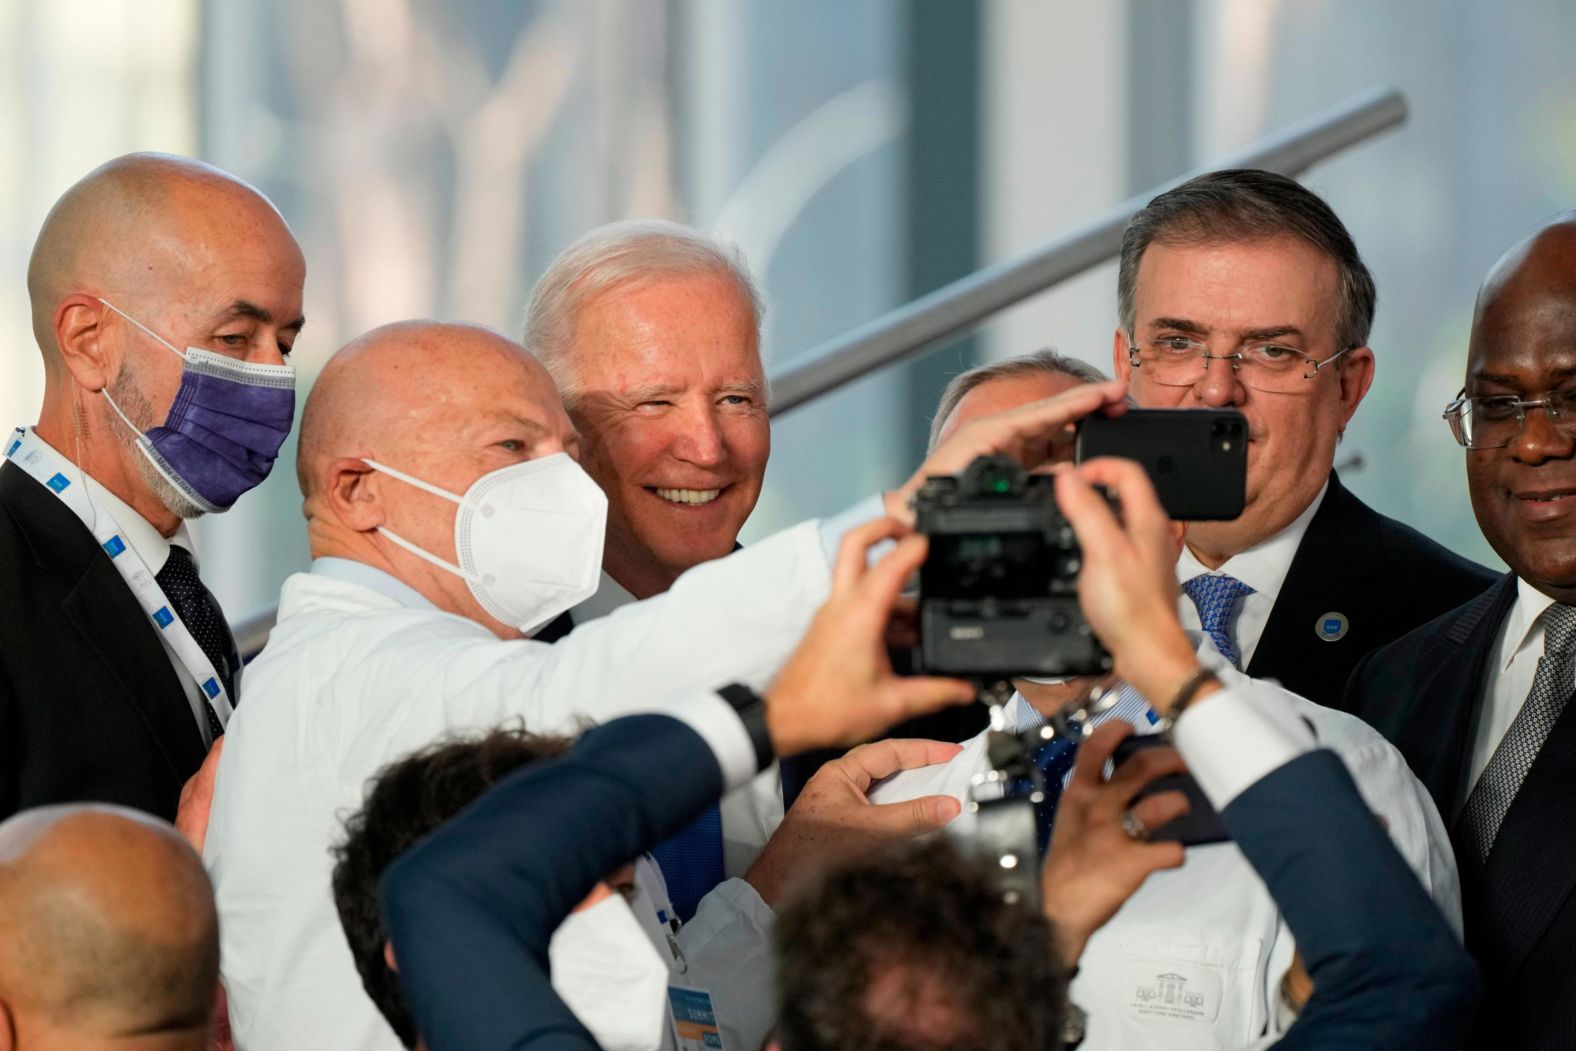 Biden poses for a selfie with medical personnel and other world leaders during Saturday's group photo shoot.